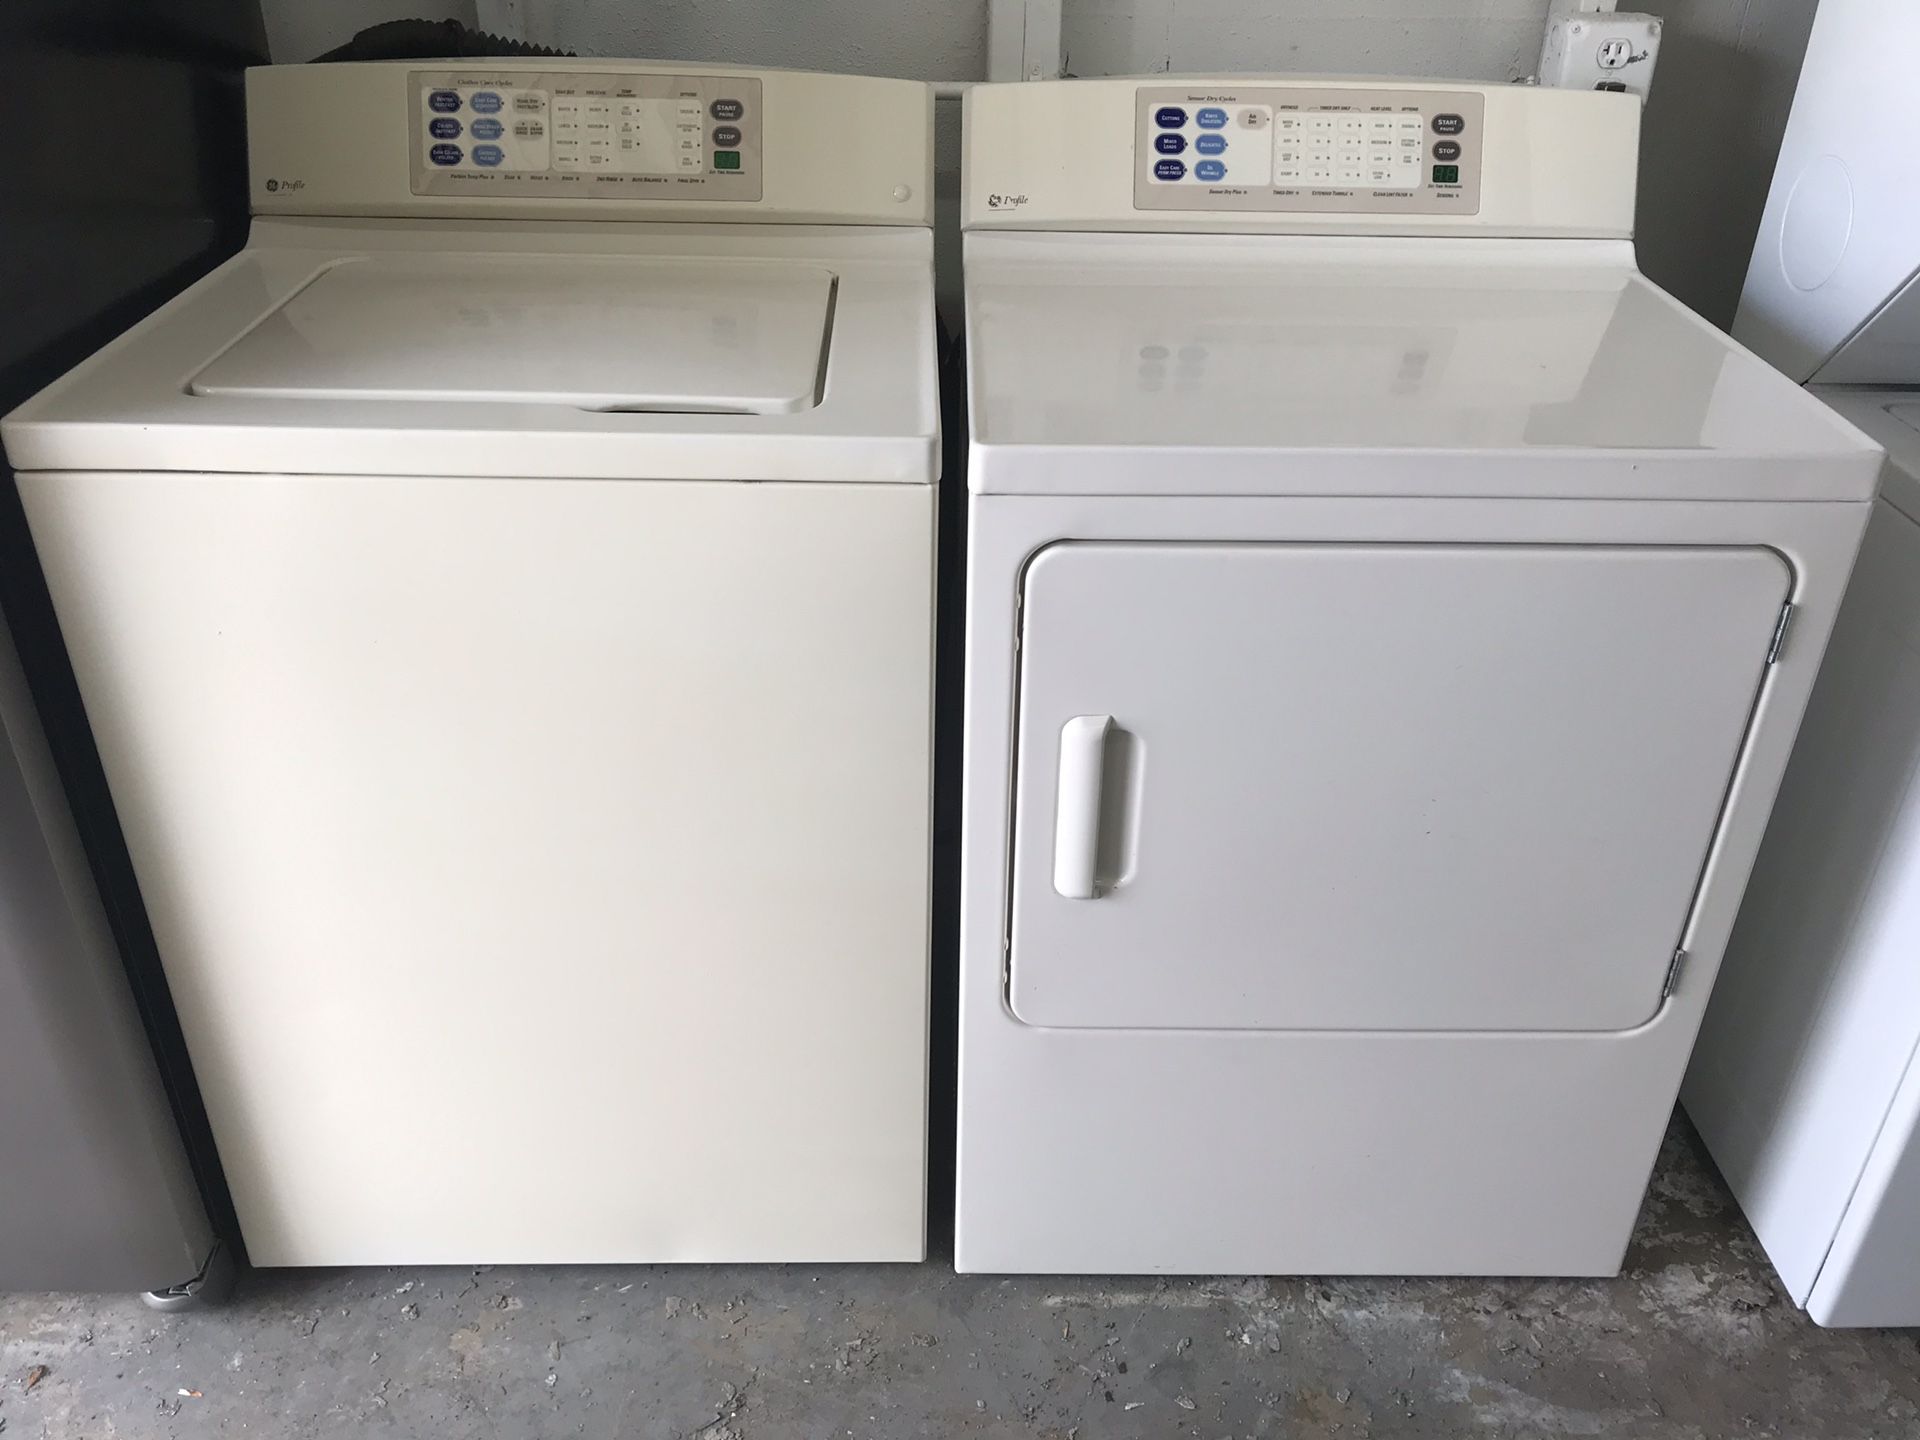 GE almond color set of washer and dryer heavy duty capacity in excellent condition plus 6 months warranty. Delivery service available . Hablamos espa